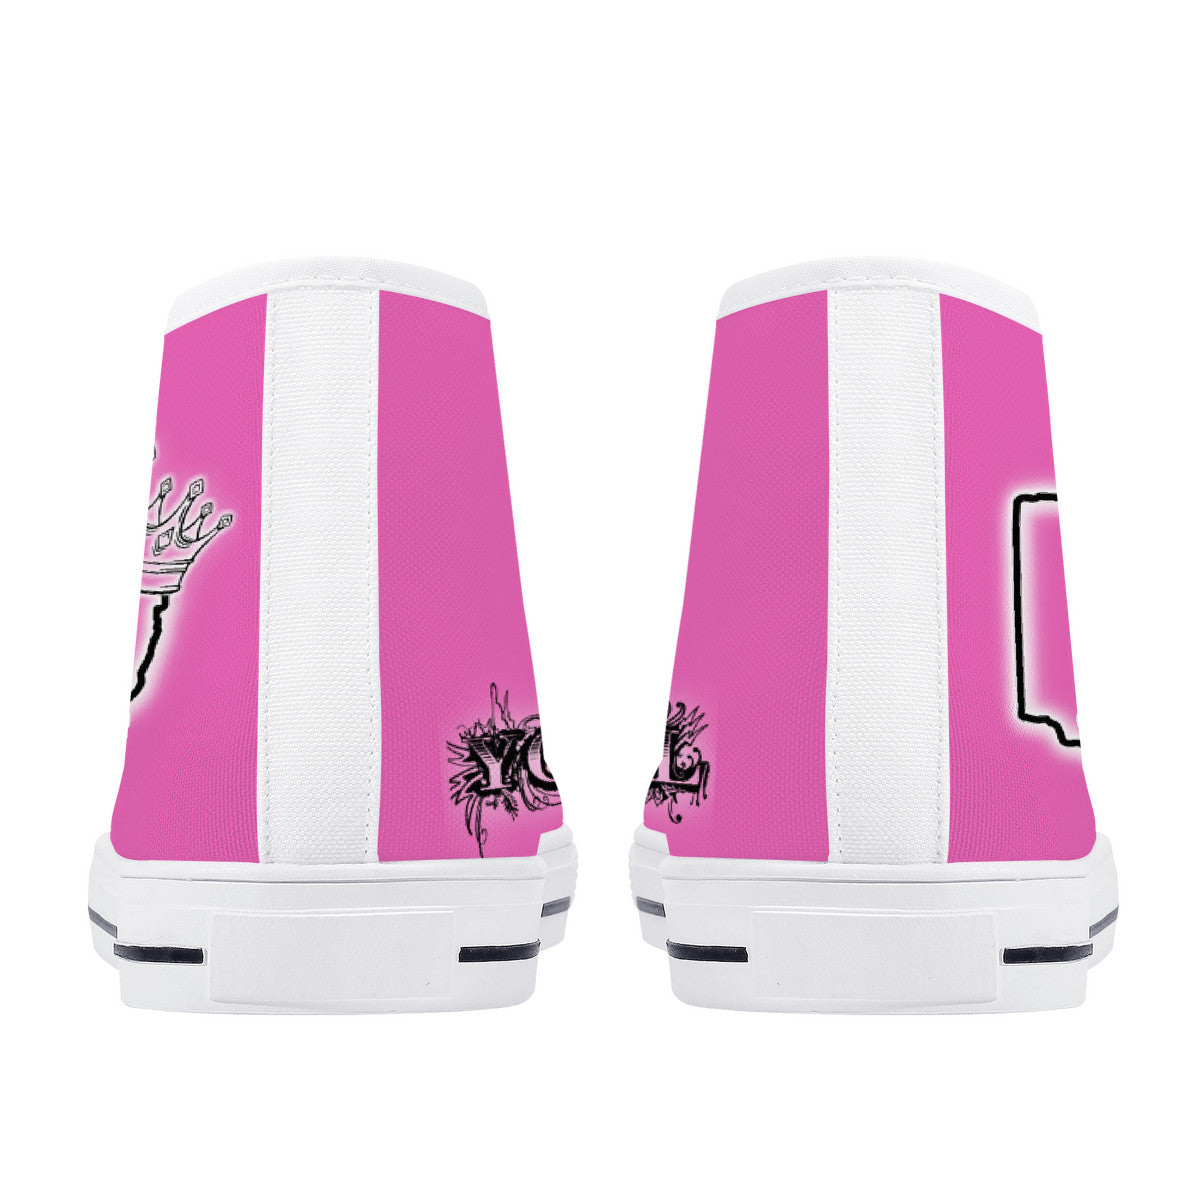 High-Top Shoes - pink